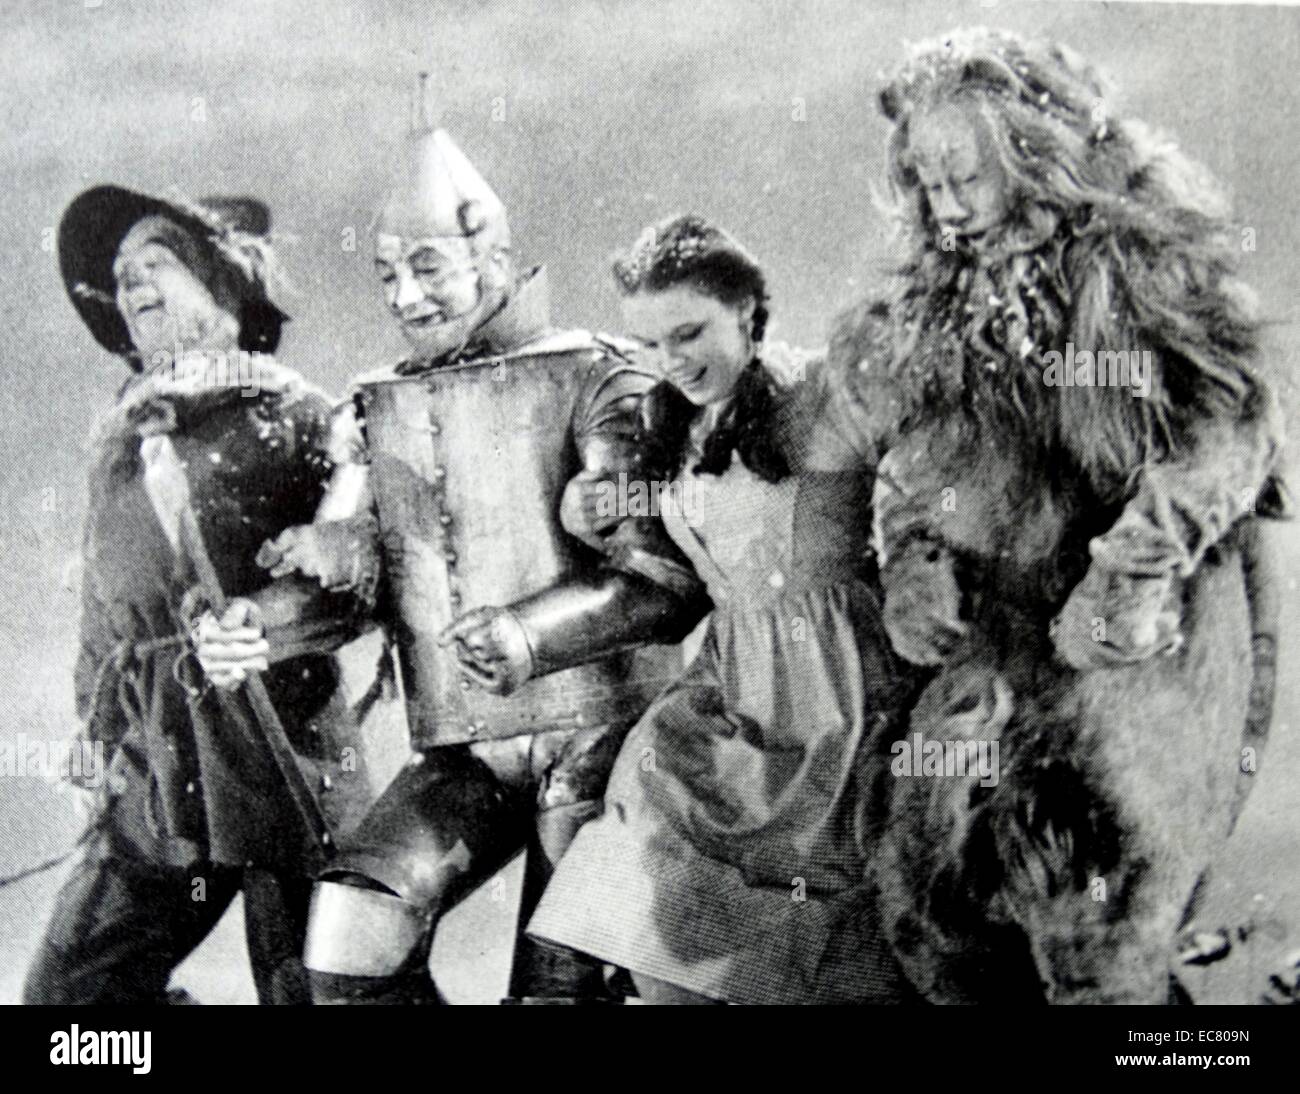 The highly successful M-G-M musical 'The Wizard of Oz', 1939. Stock Photo